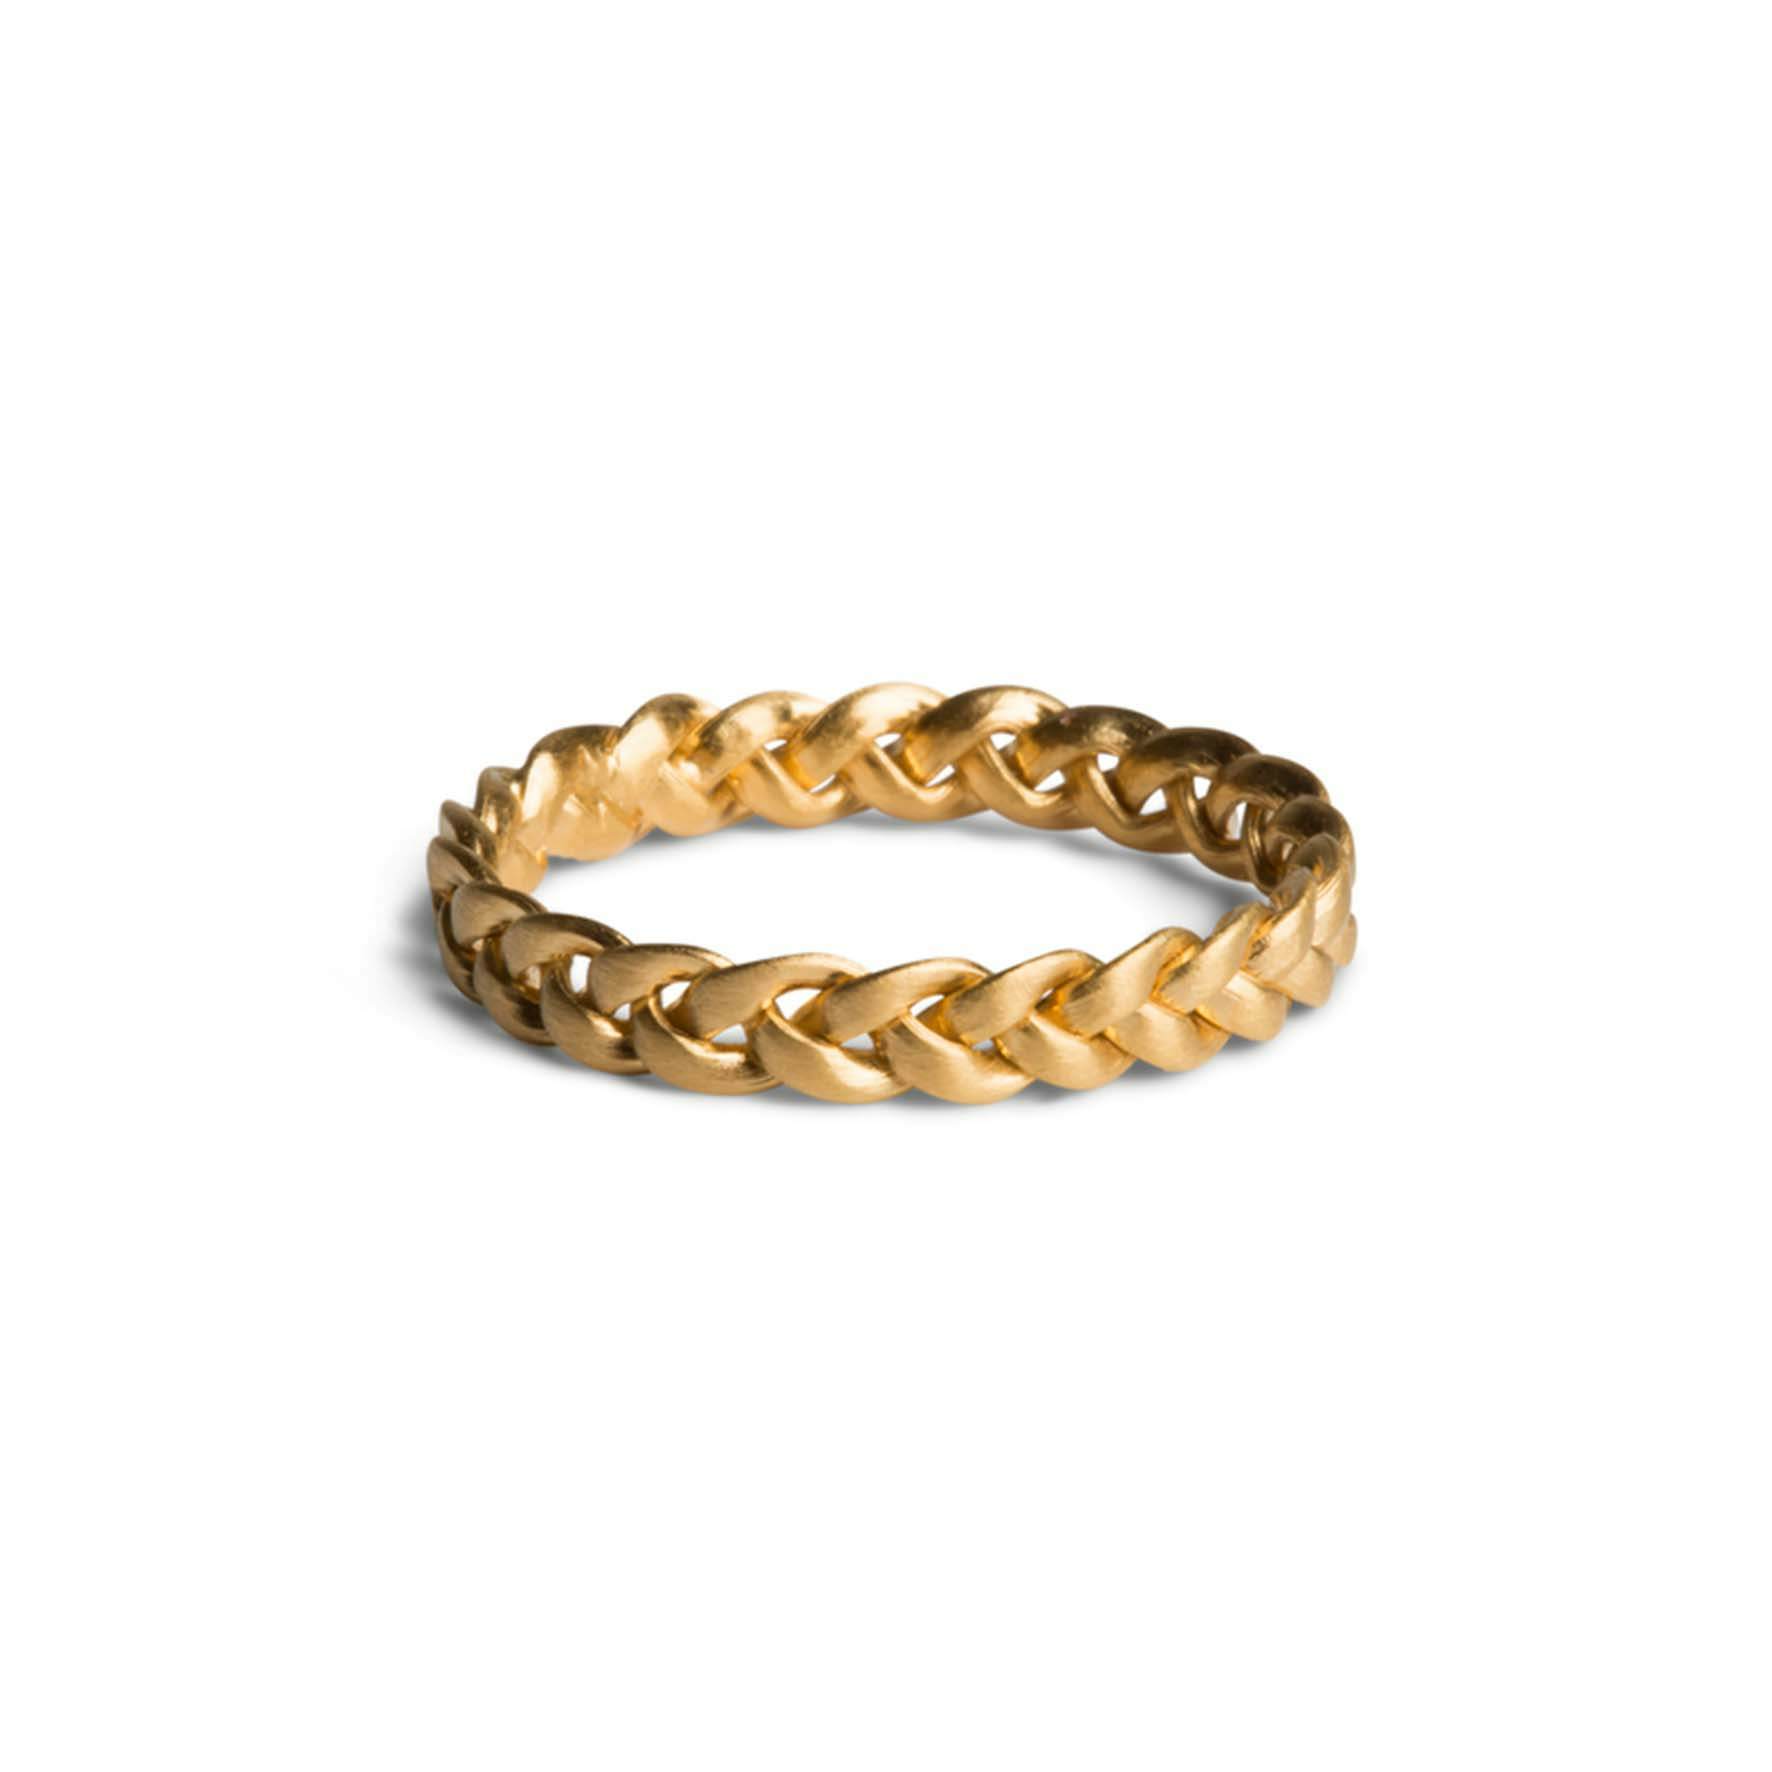 Medium Braided Ring from Jane Kønig in Goldplated-Silver Sterling 925